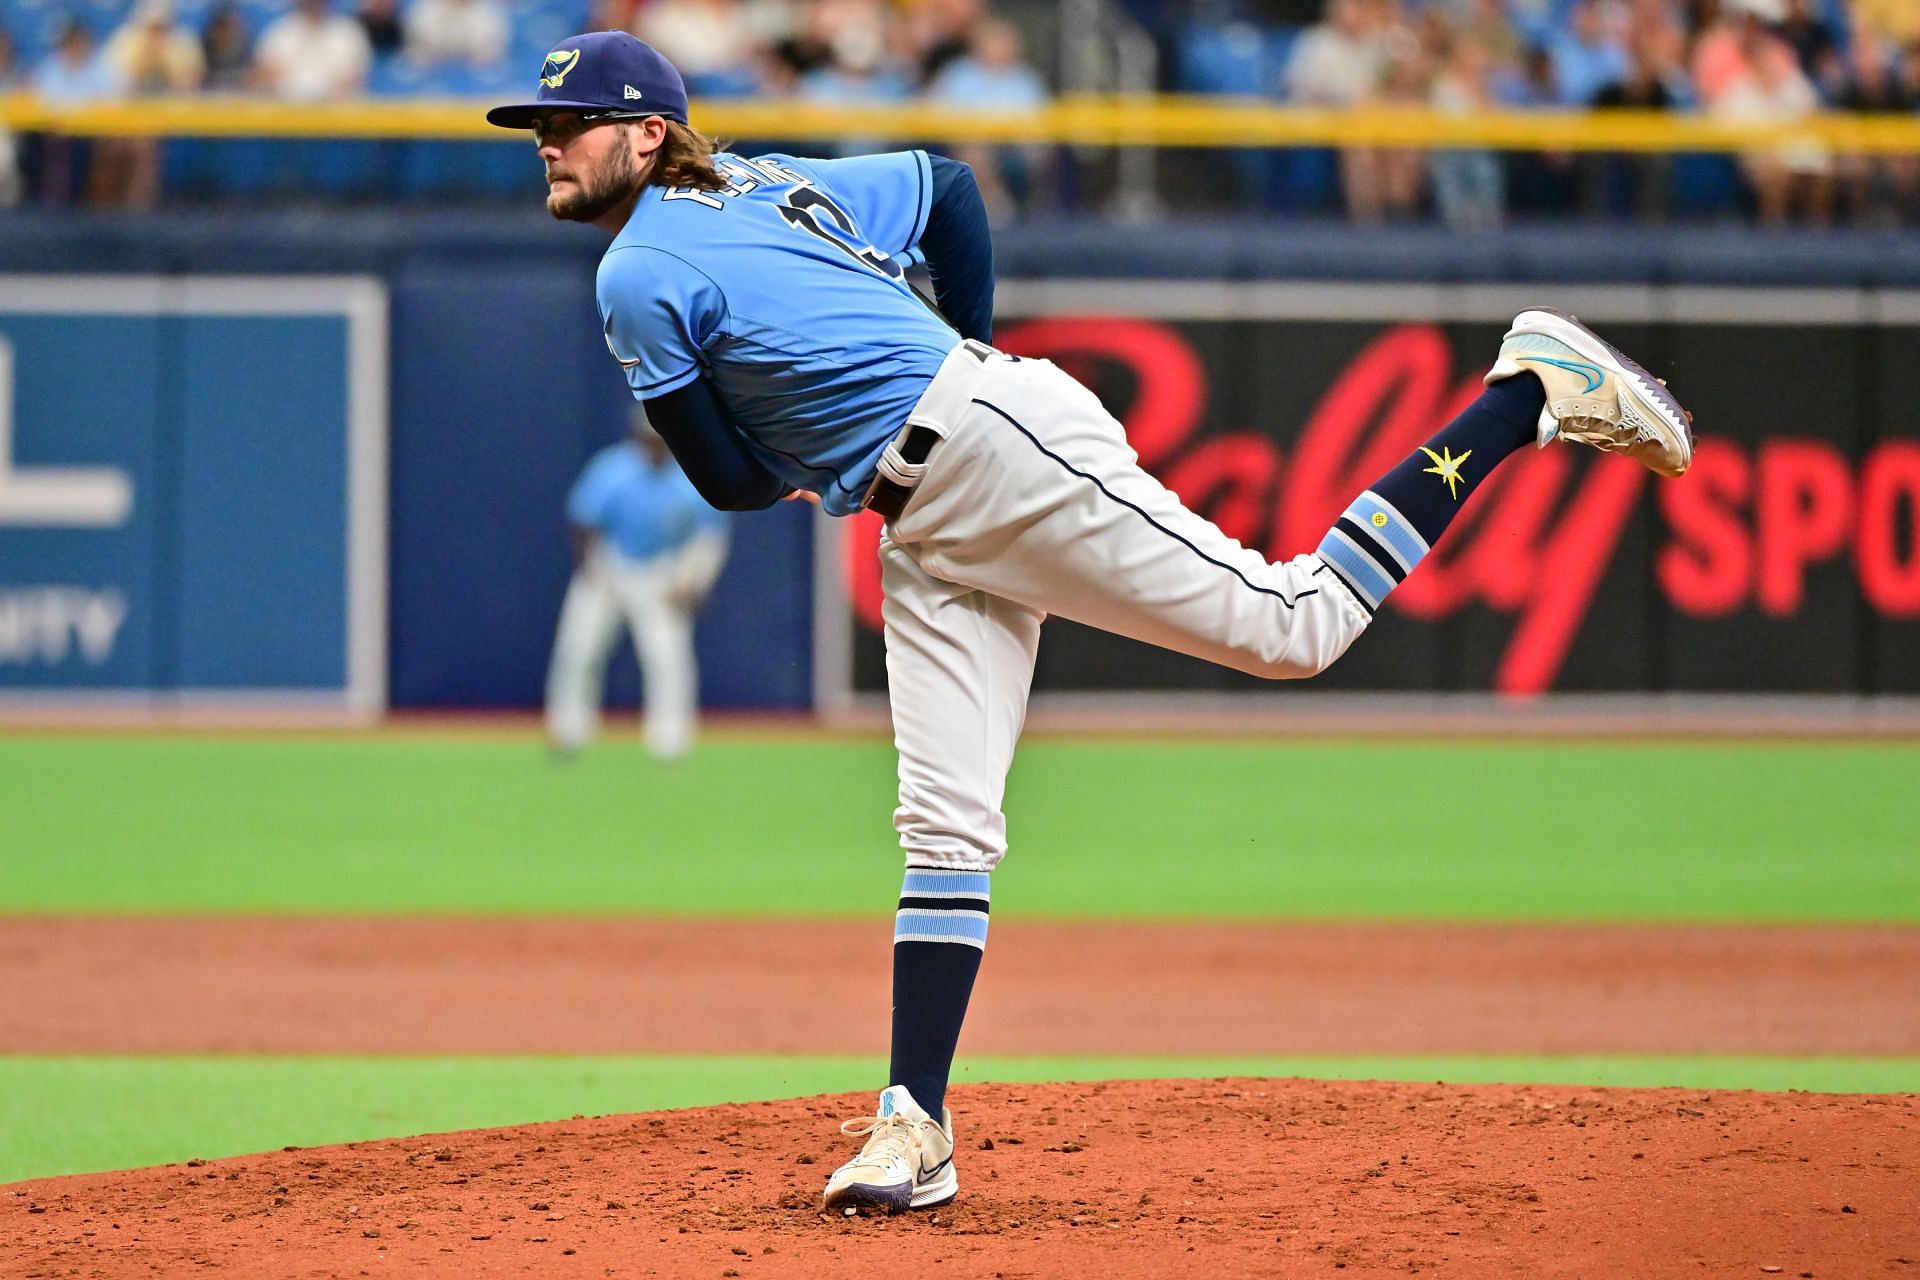 The Tampa Bay Rays have won three of its last four series and lowered its team earned run average to 3.18 this season